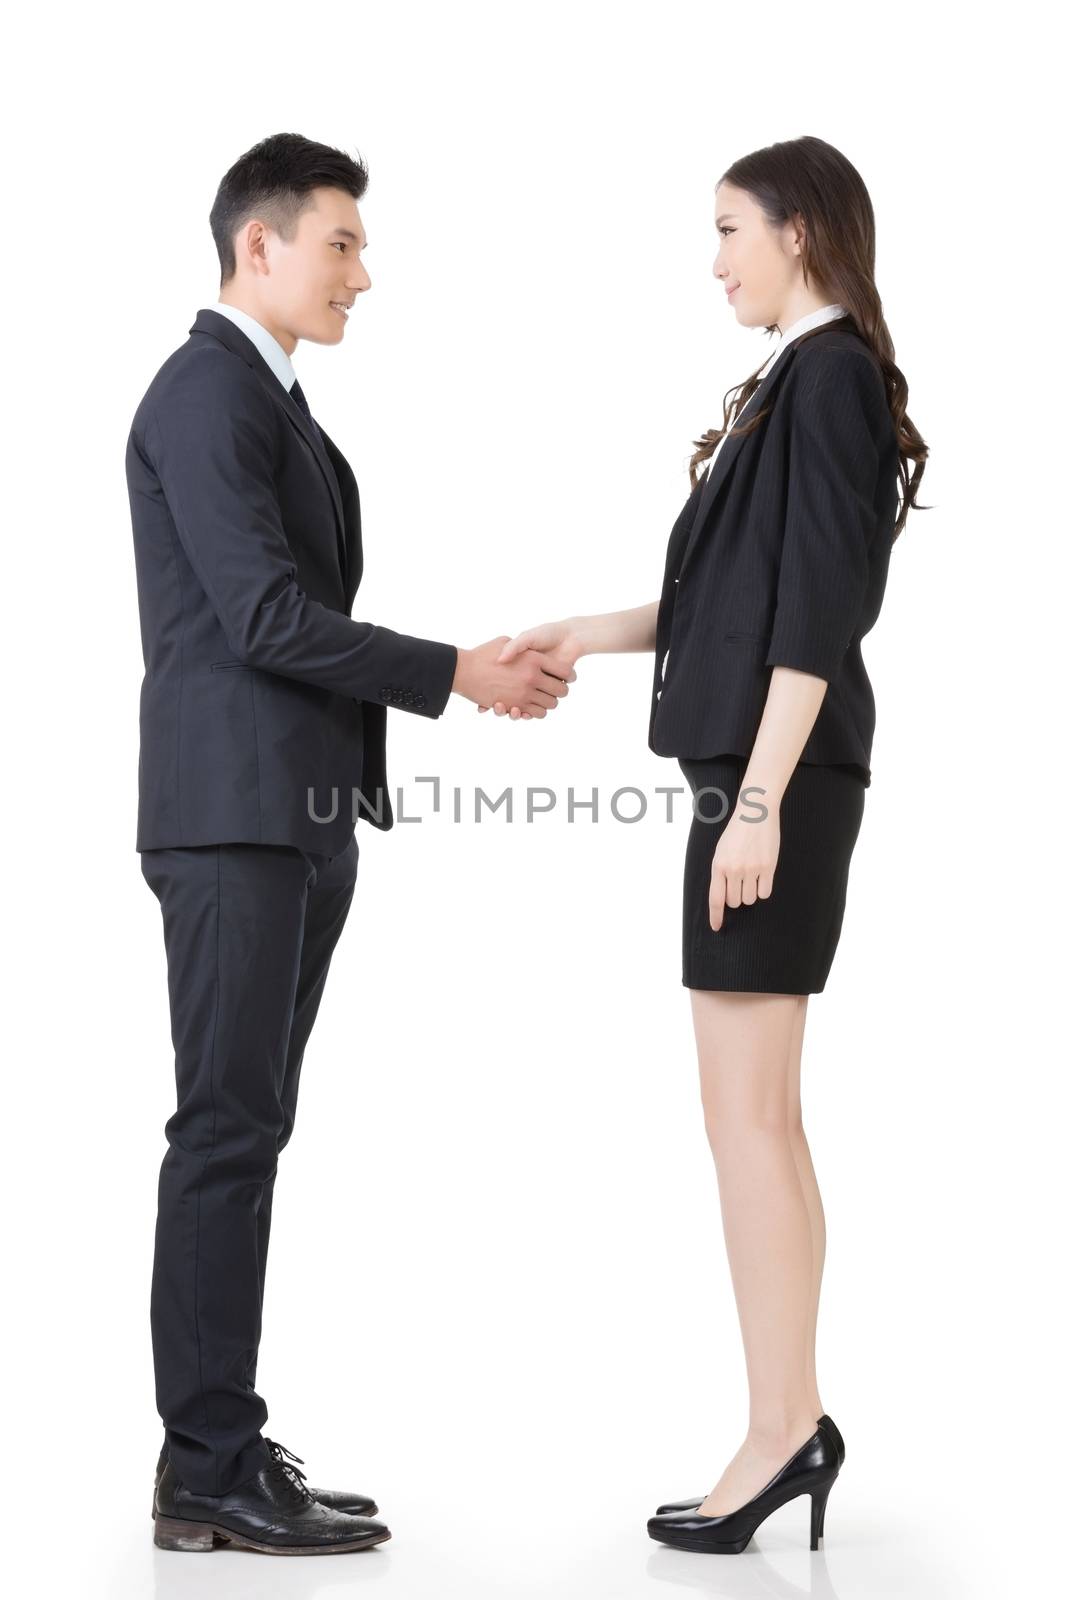 Asian business man and woman shake hands, full length portrait isolated on white background.